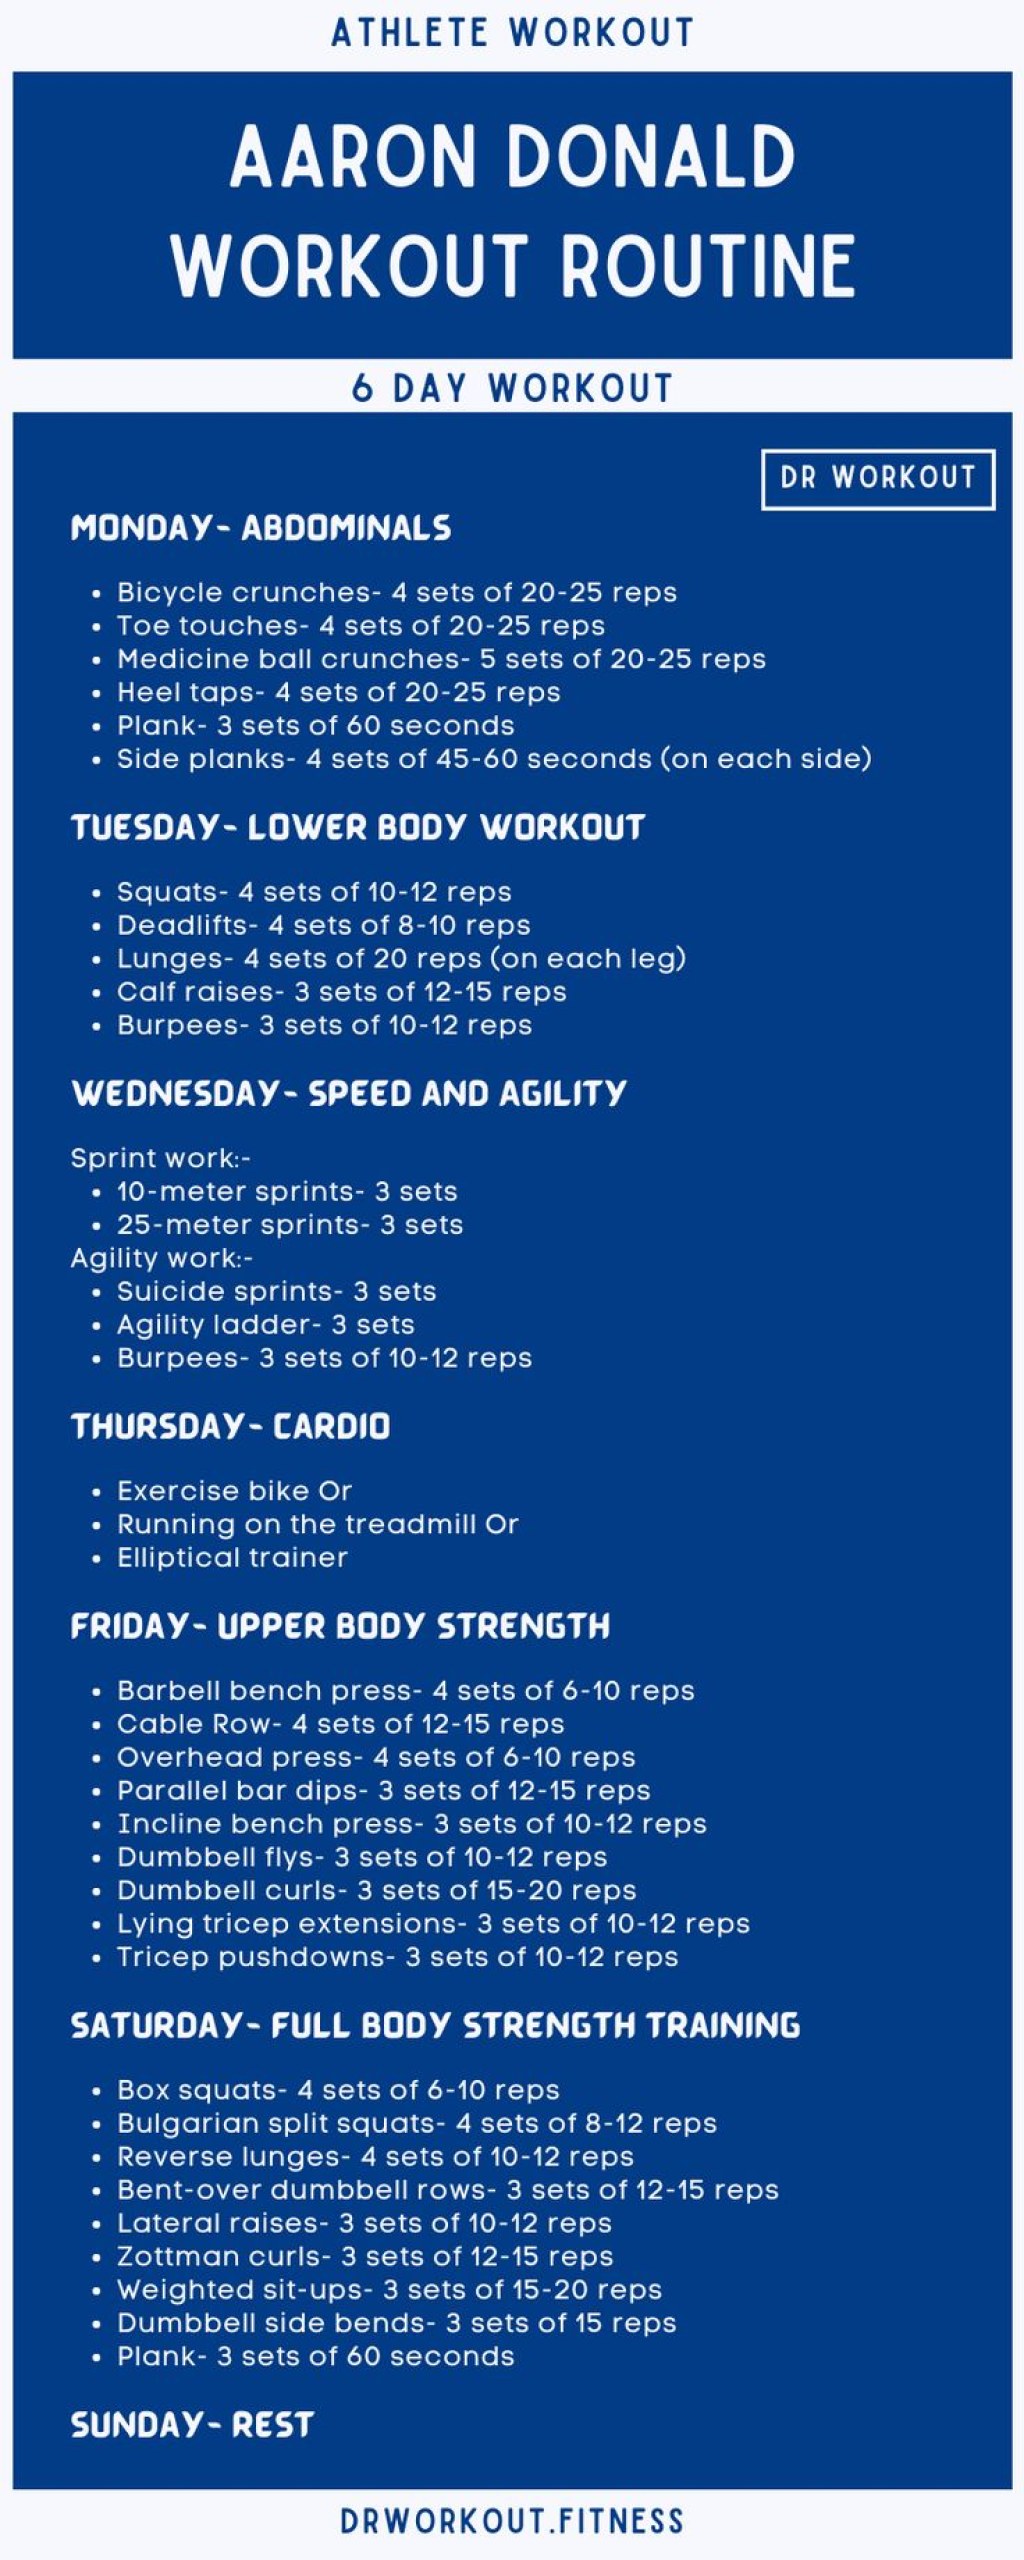 Picture of: Aaron Donald’s Workout Routine in   Workout routine, Workout